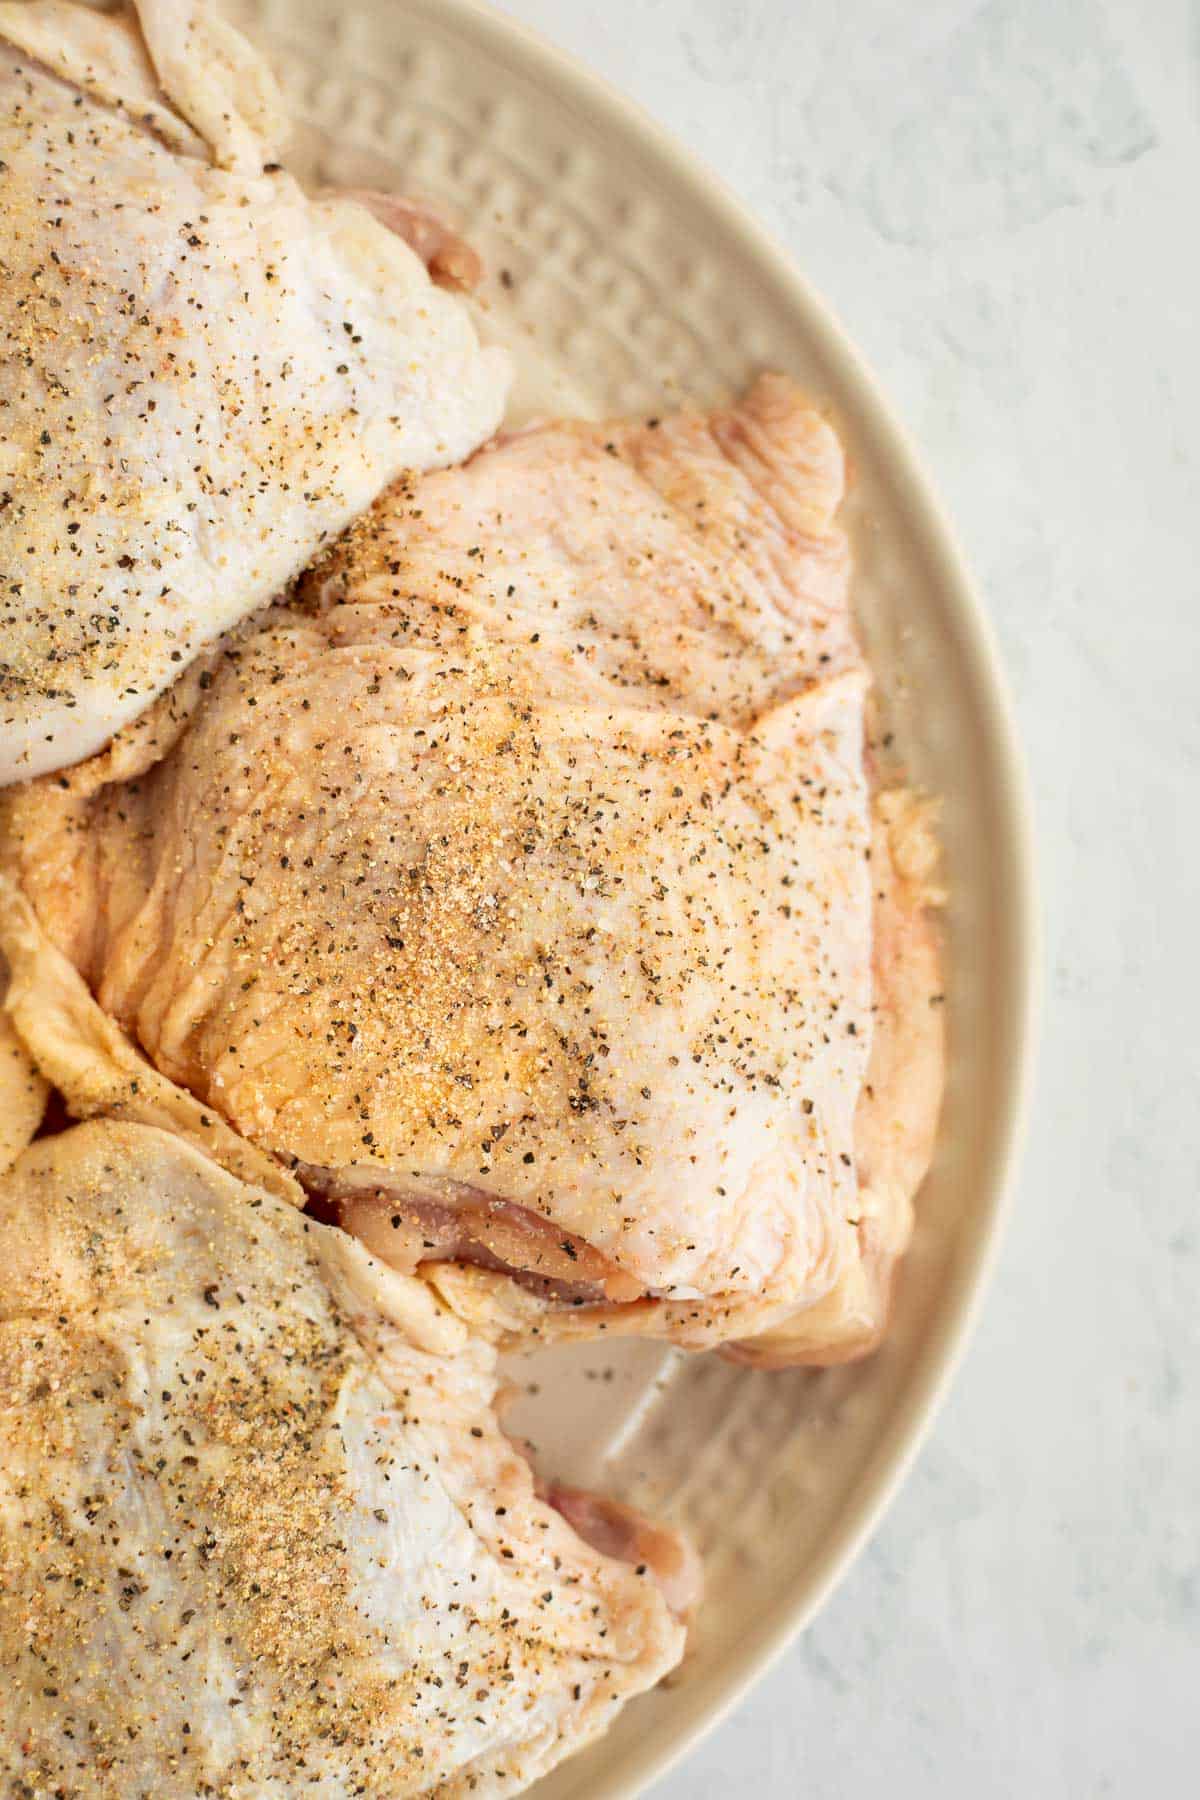 seasoned chicken thighs on a white plate.